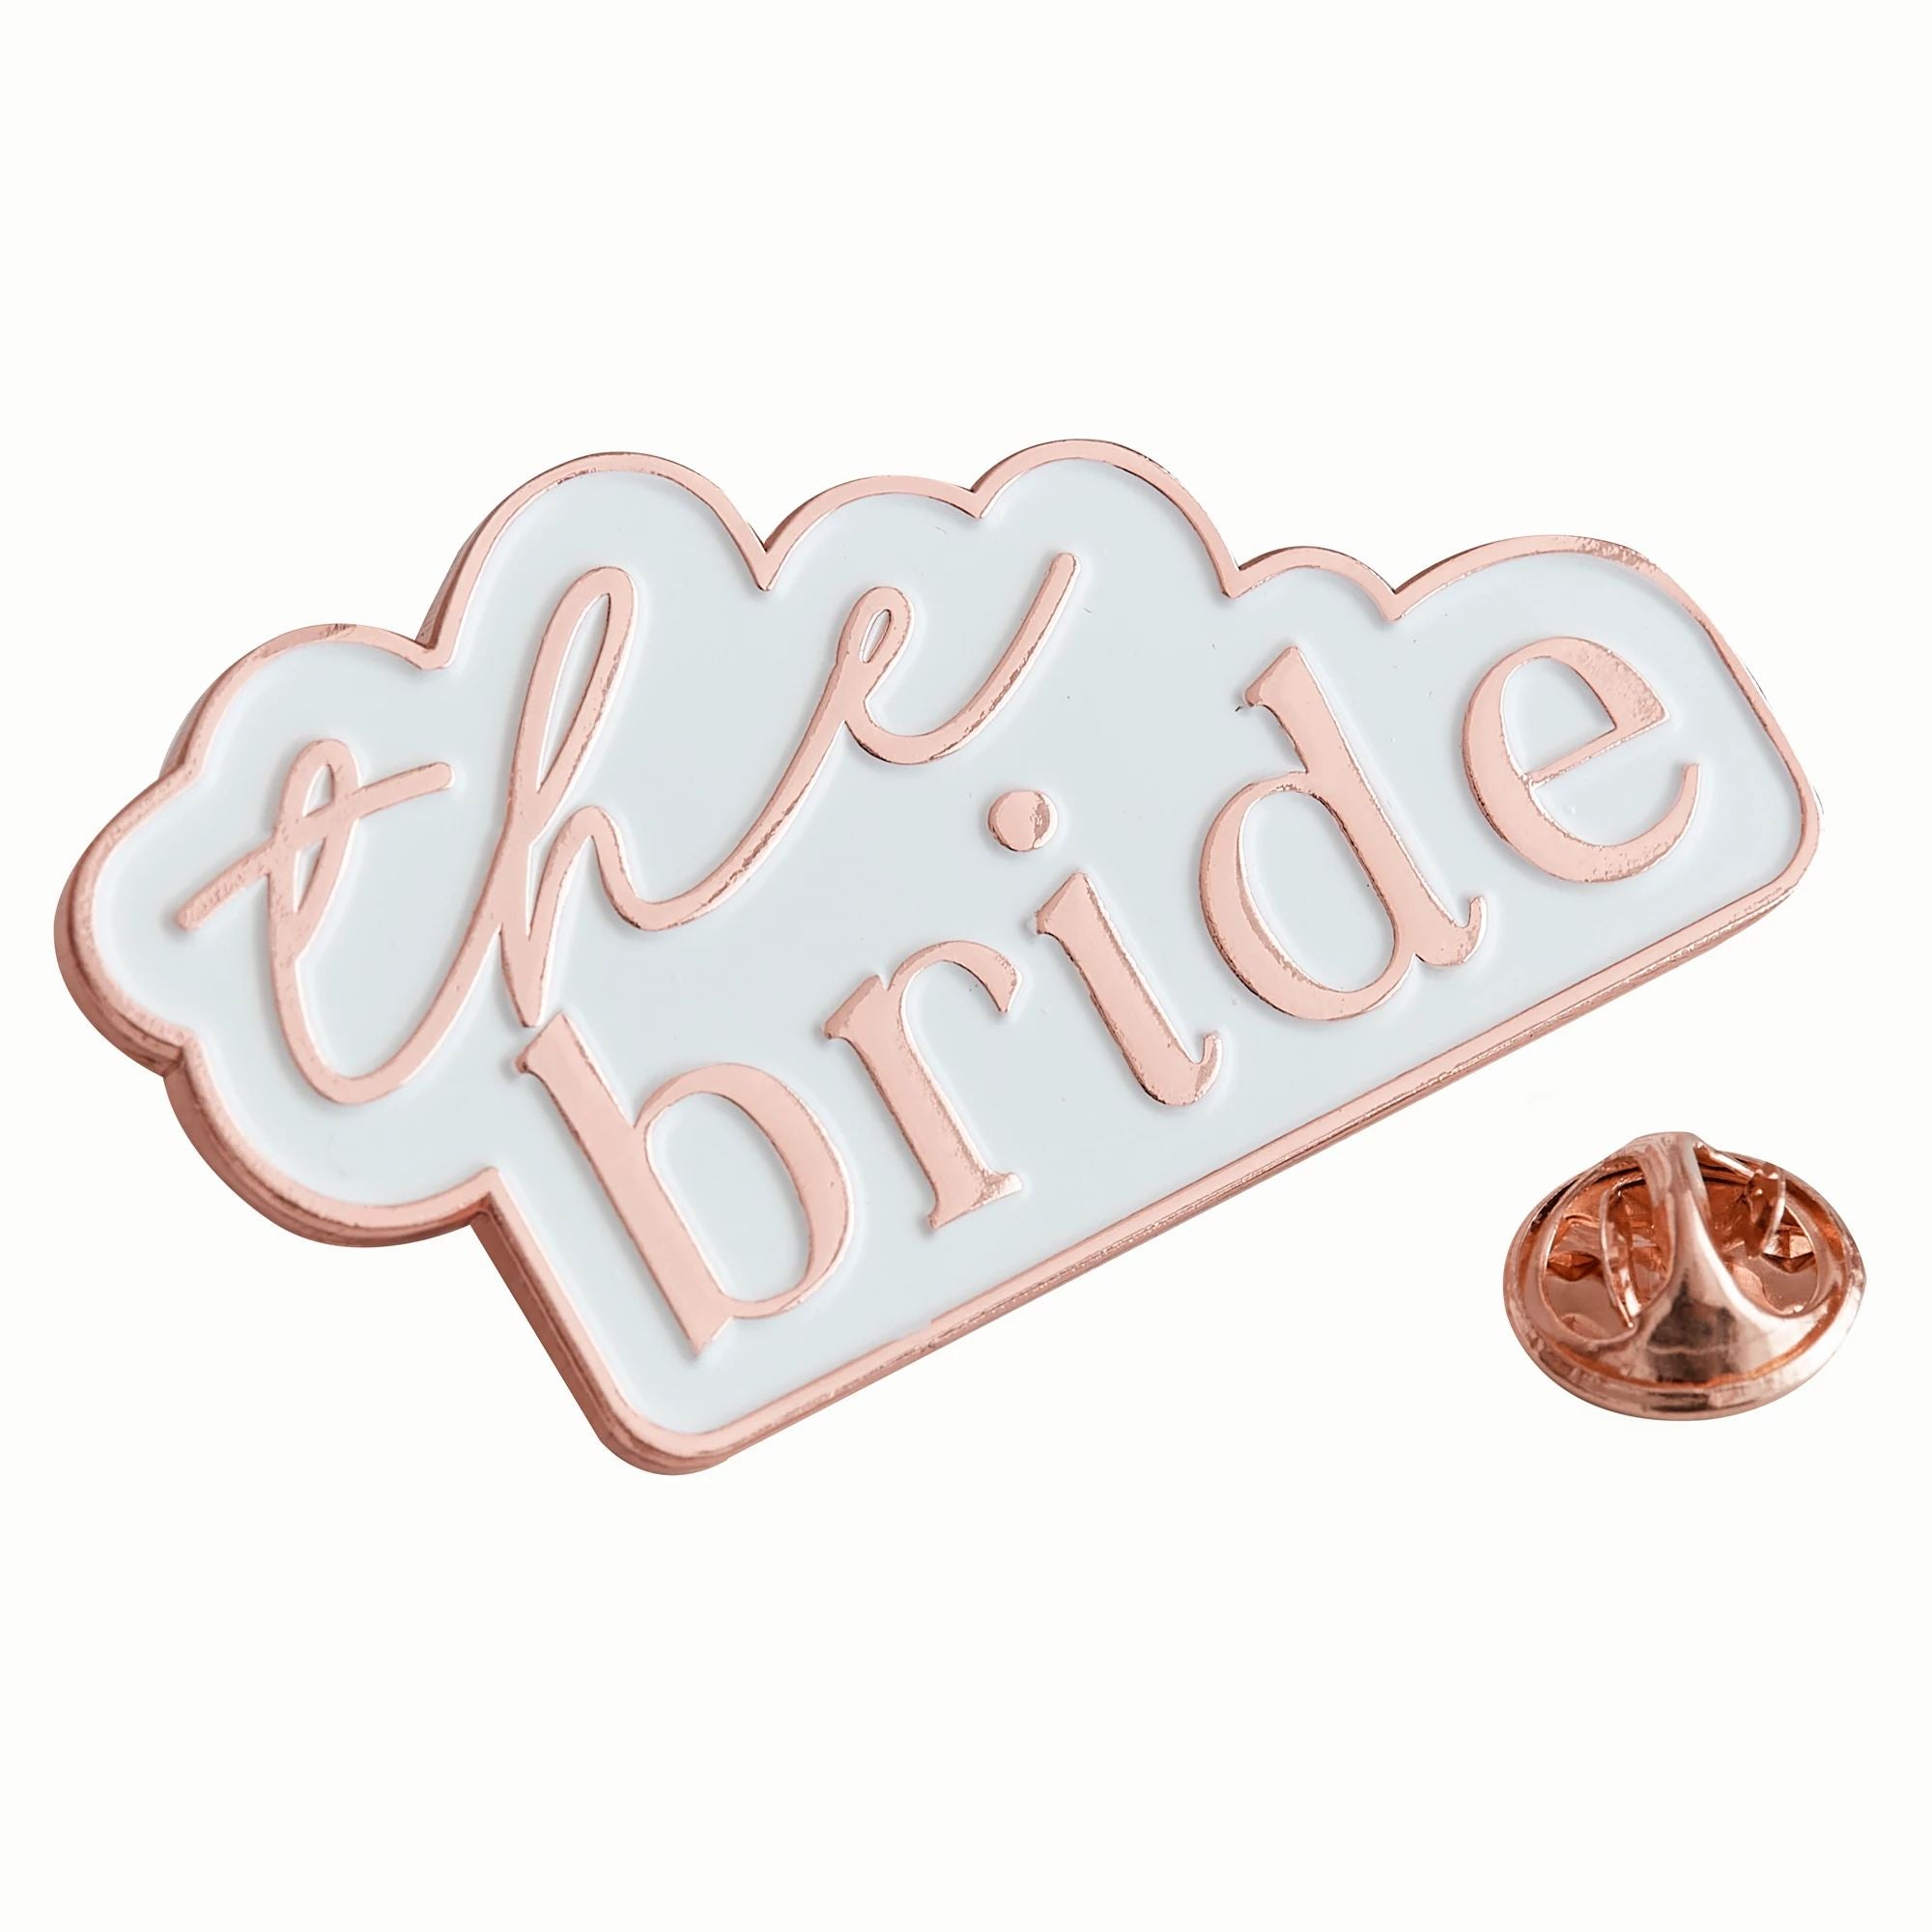 Ginger Ray WEDDING Ginger Ray "The Bride" Enamel Pin